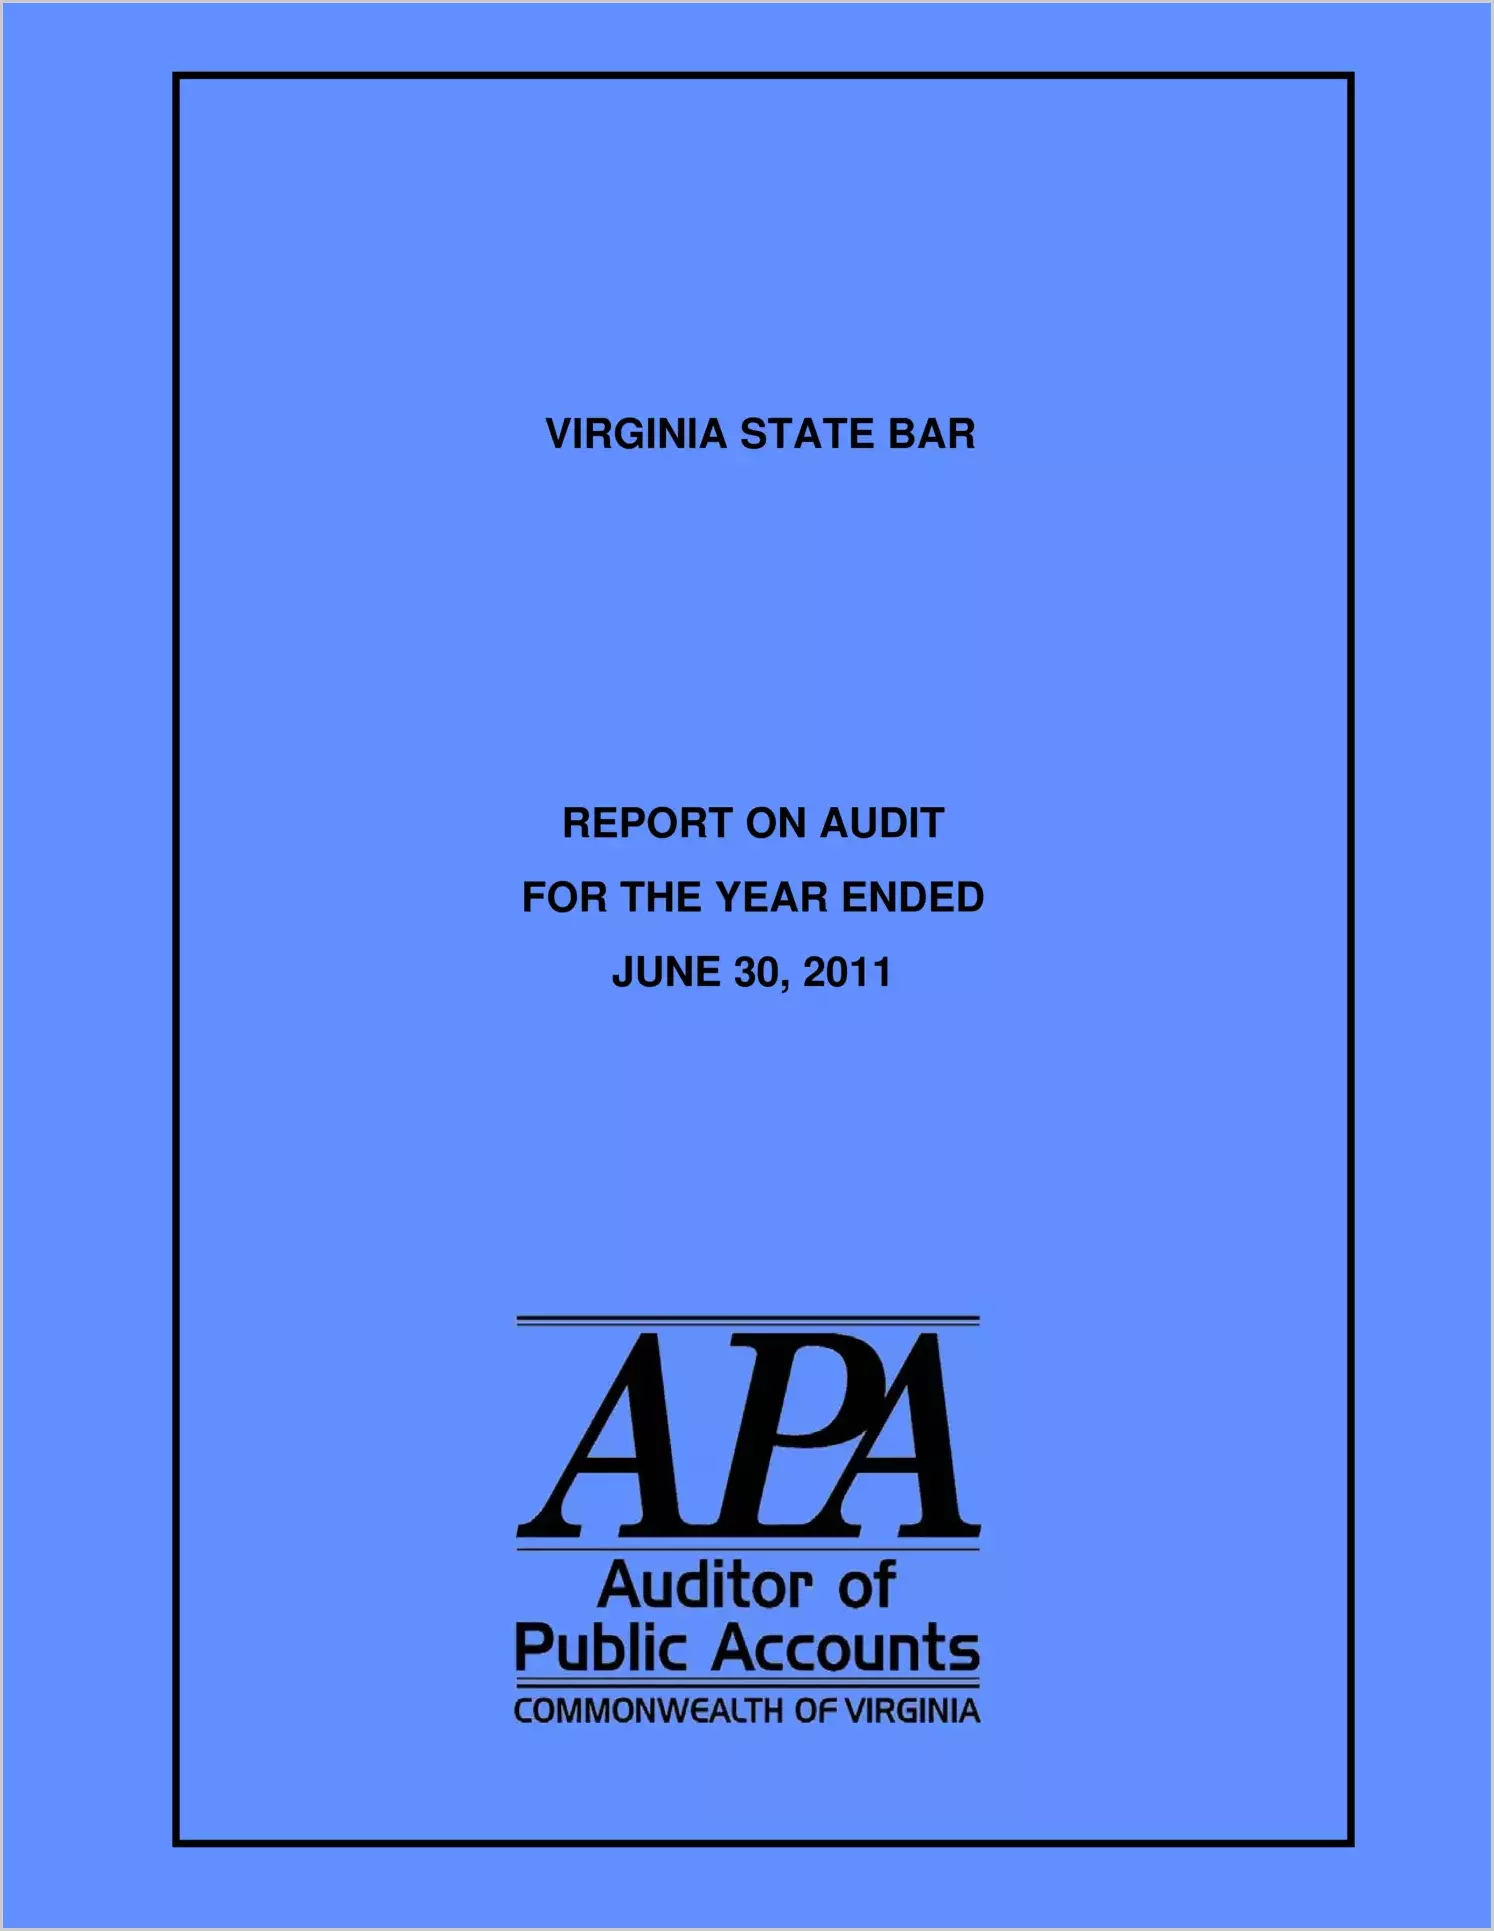 Virginia State Bar for the year ended June 30, 2011